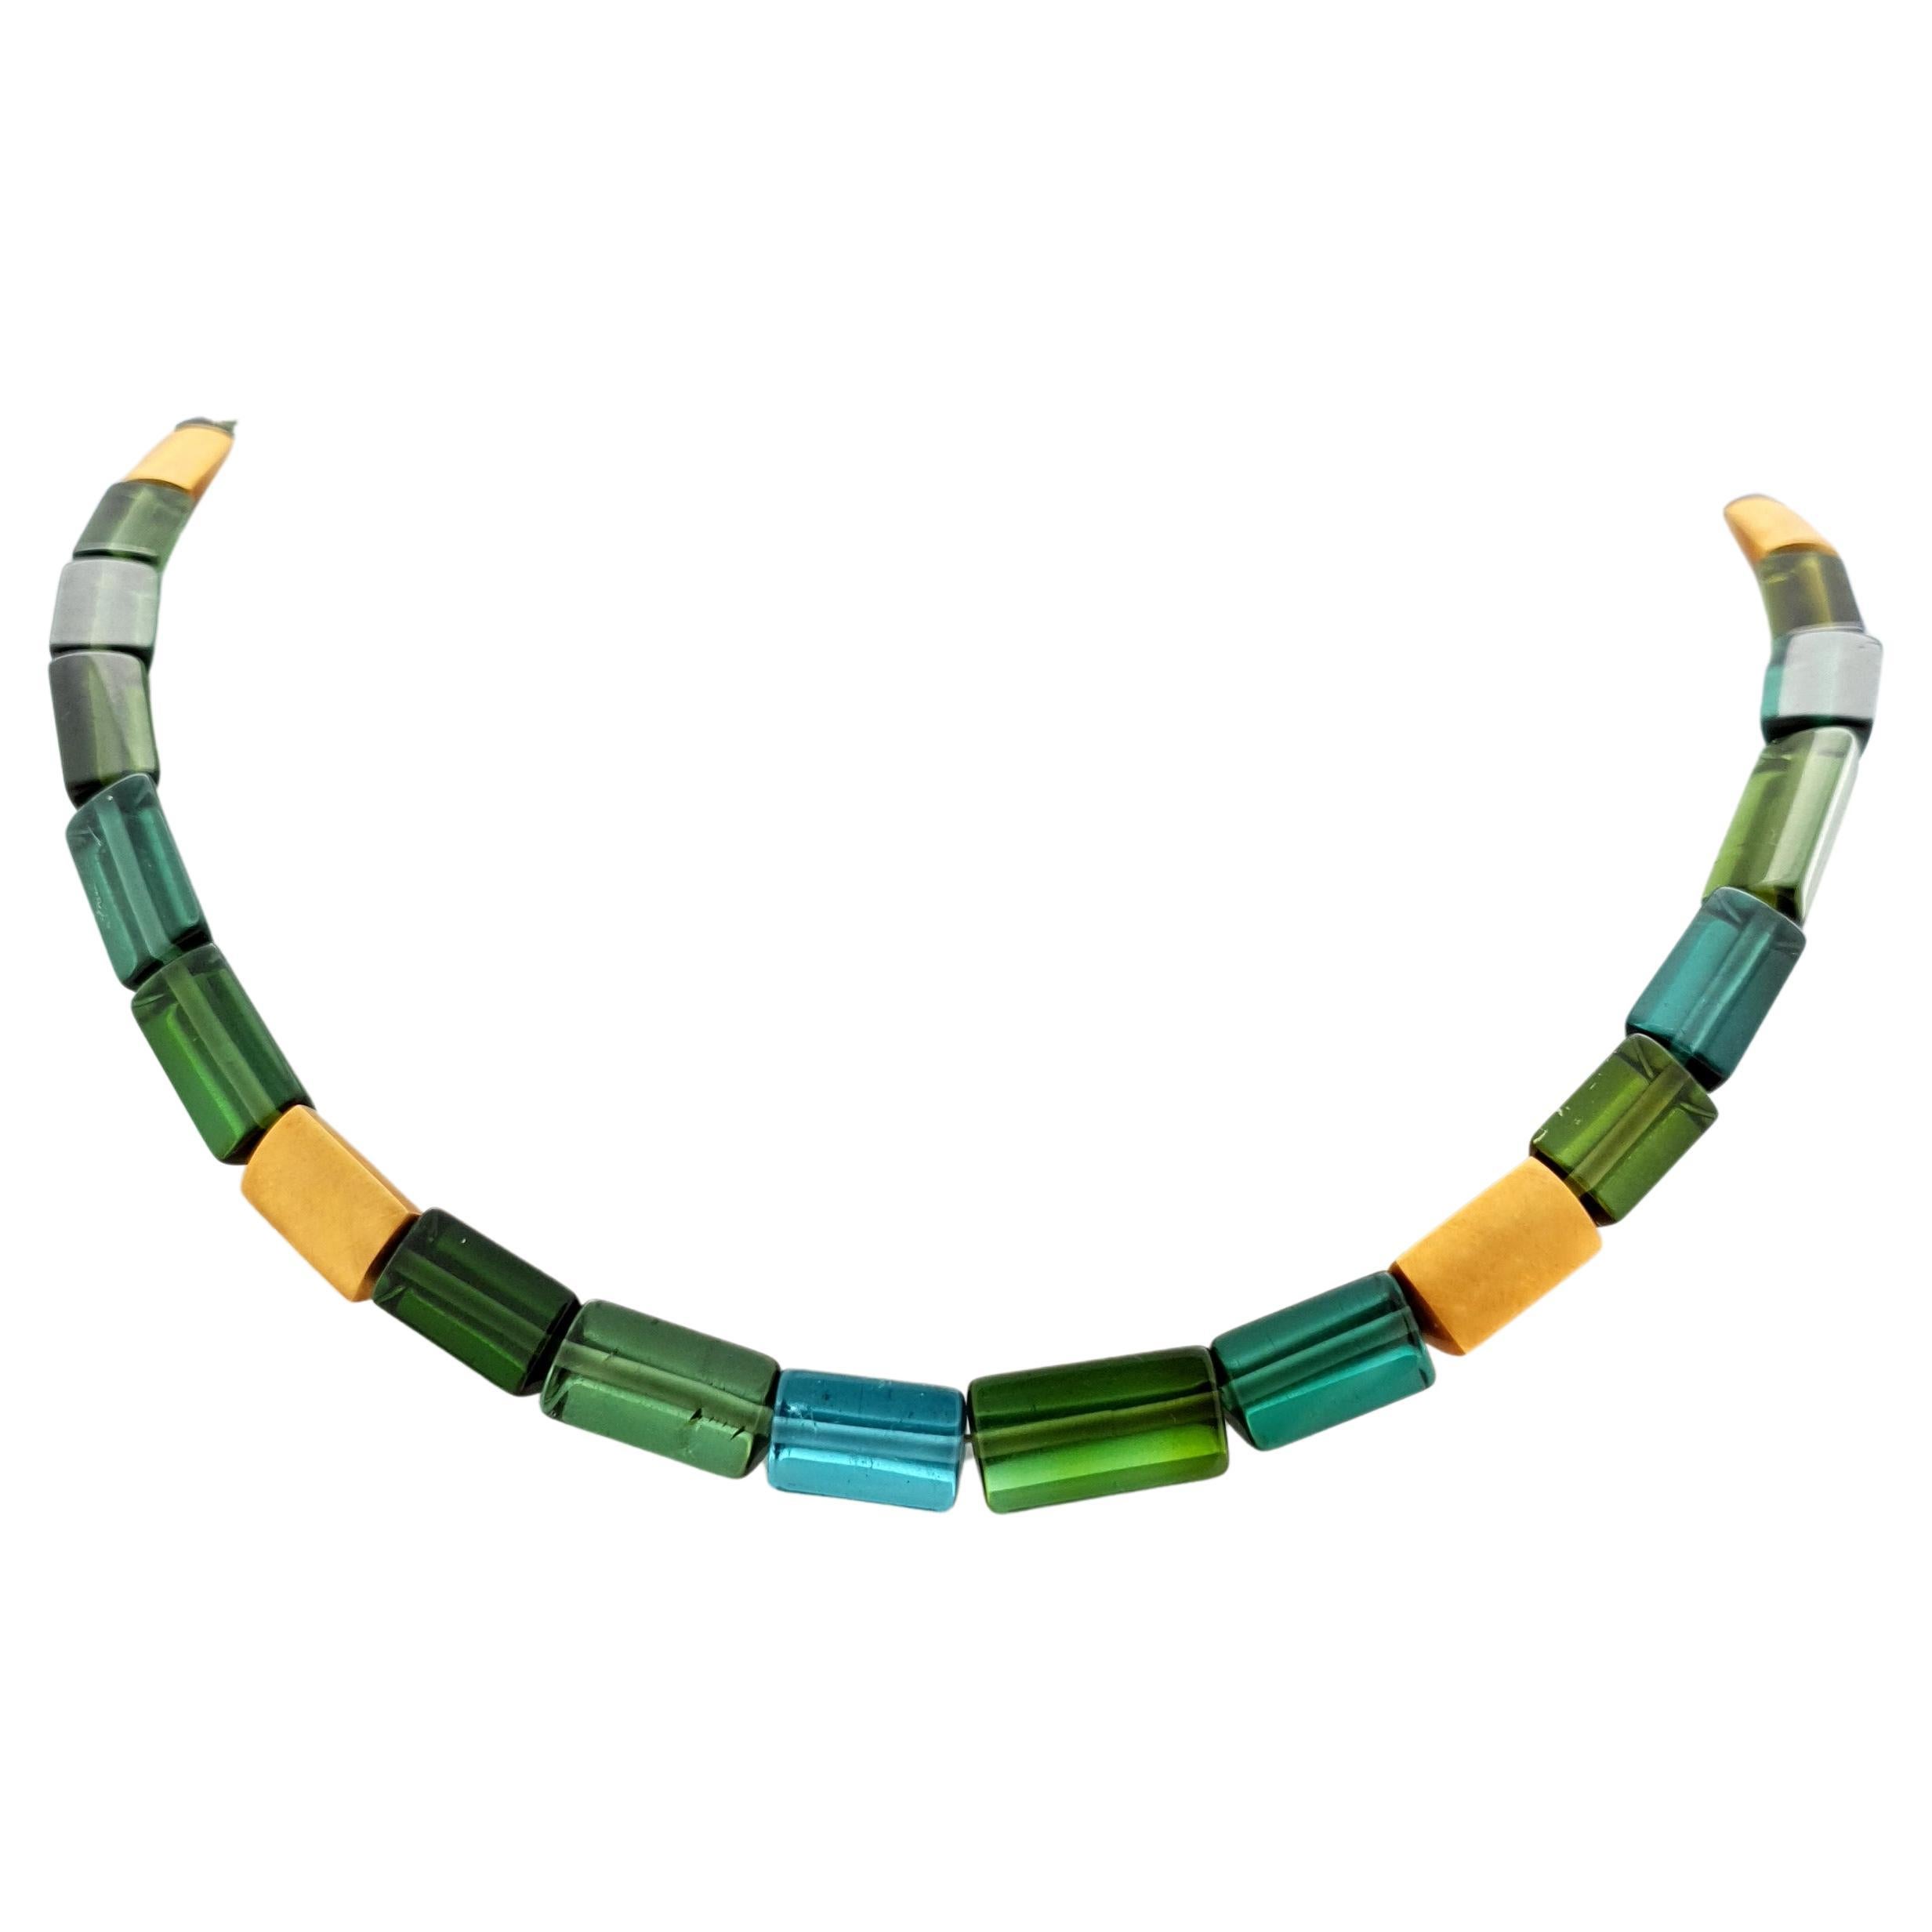 This Blue green Tourmaline Crystal Beaded Necklace with 18 Carat mat yellow Gold is totally handmade. Cutting as well as goldwork are made in German quality. The screw clasp is easy to handle and very secure. Triangular goldbeads match perfectly to